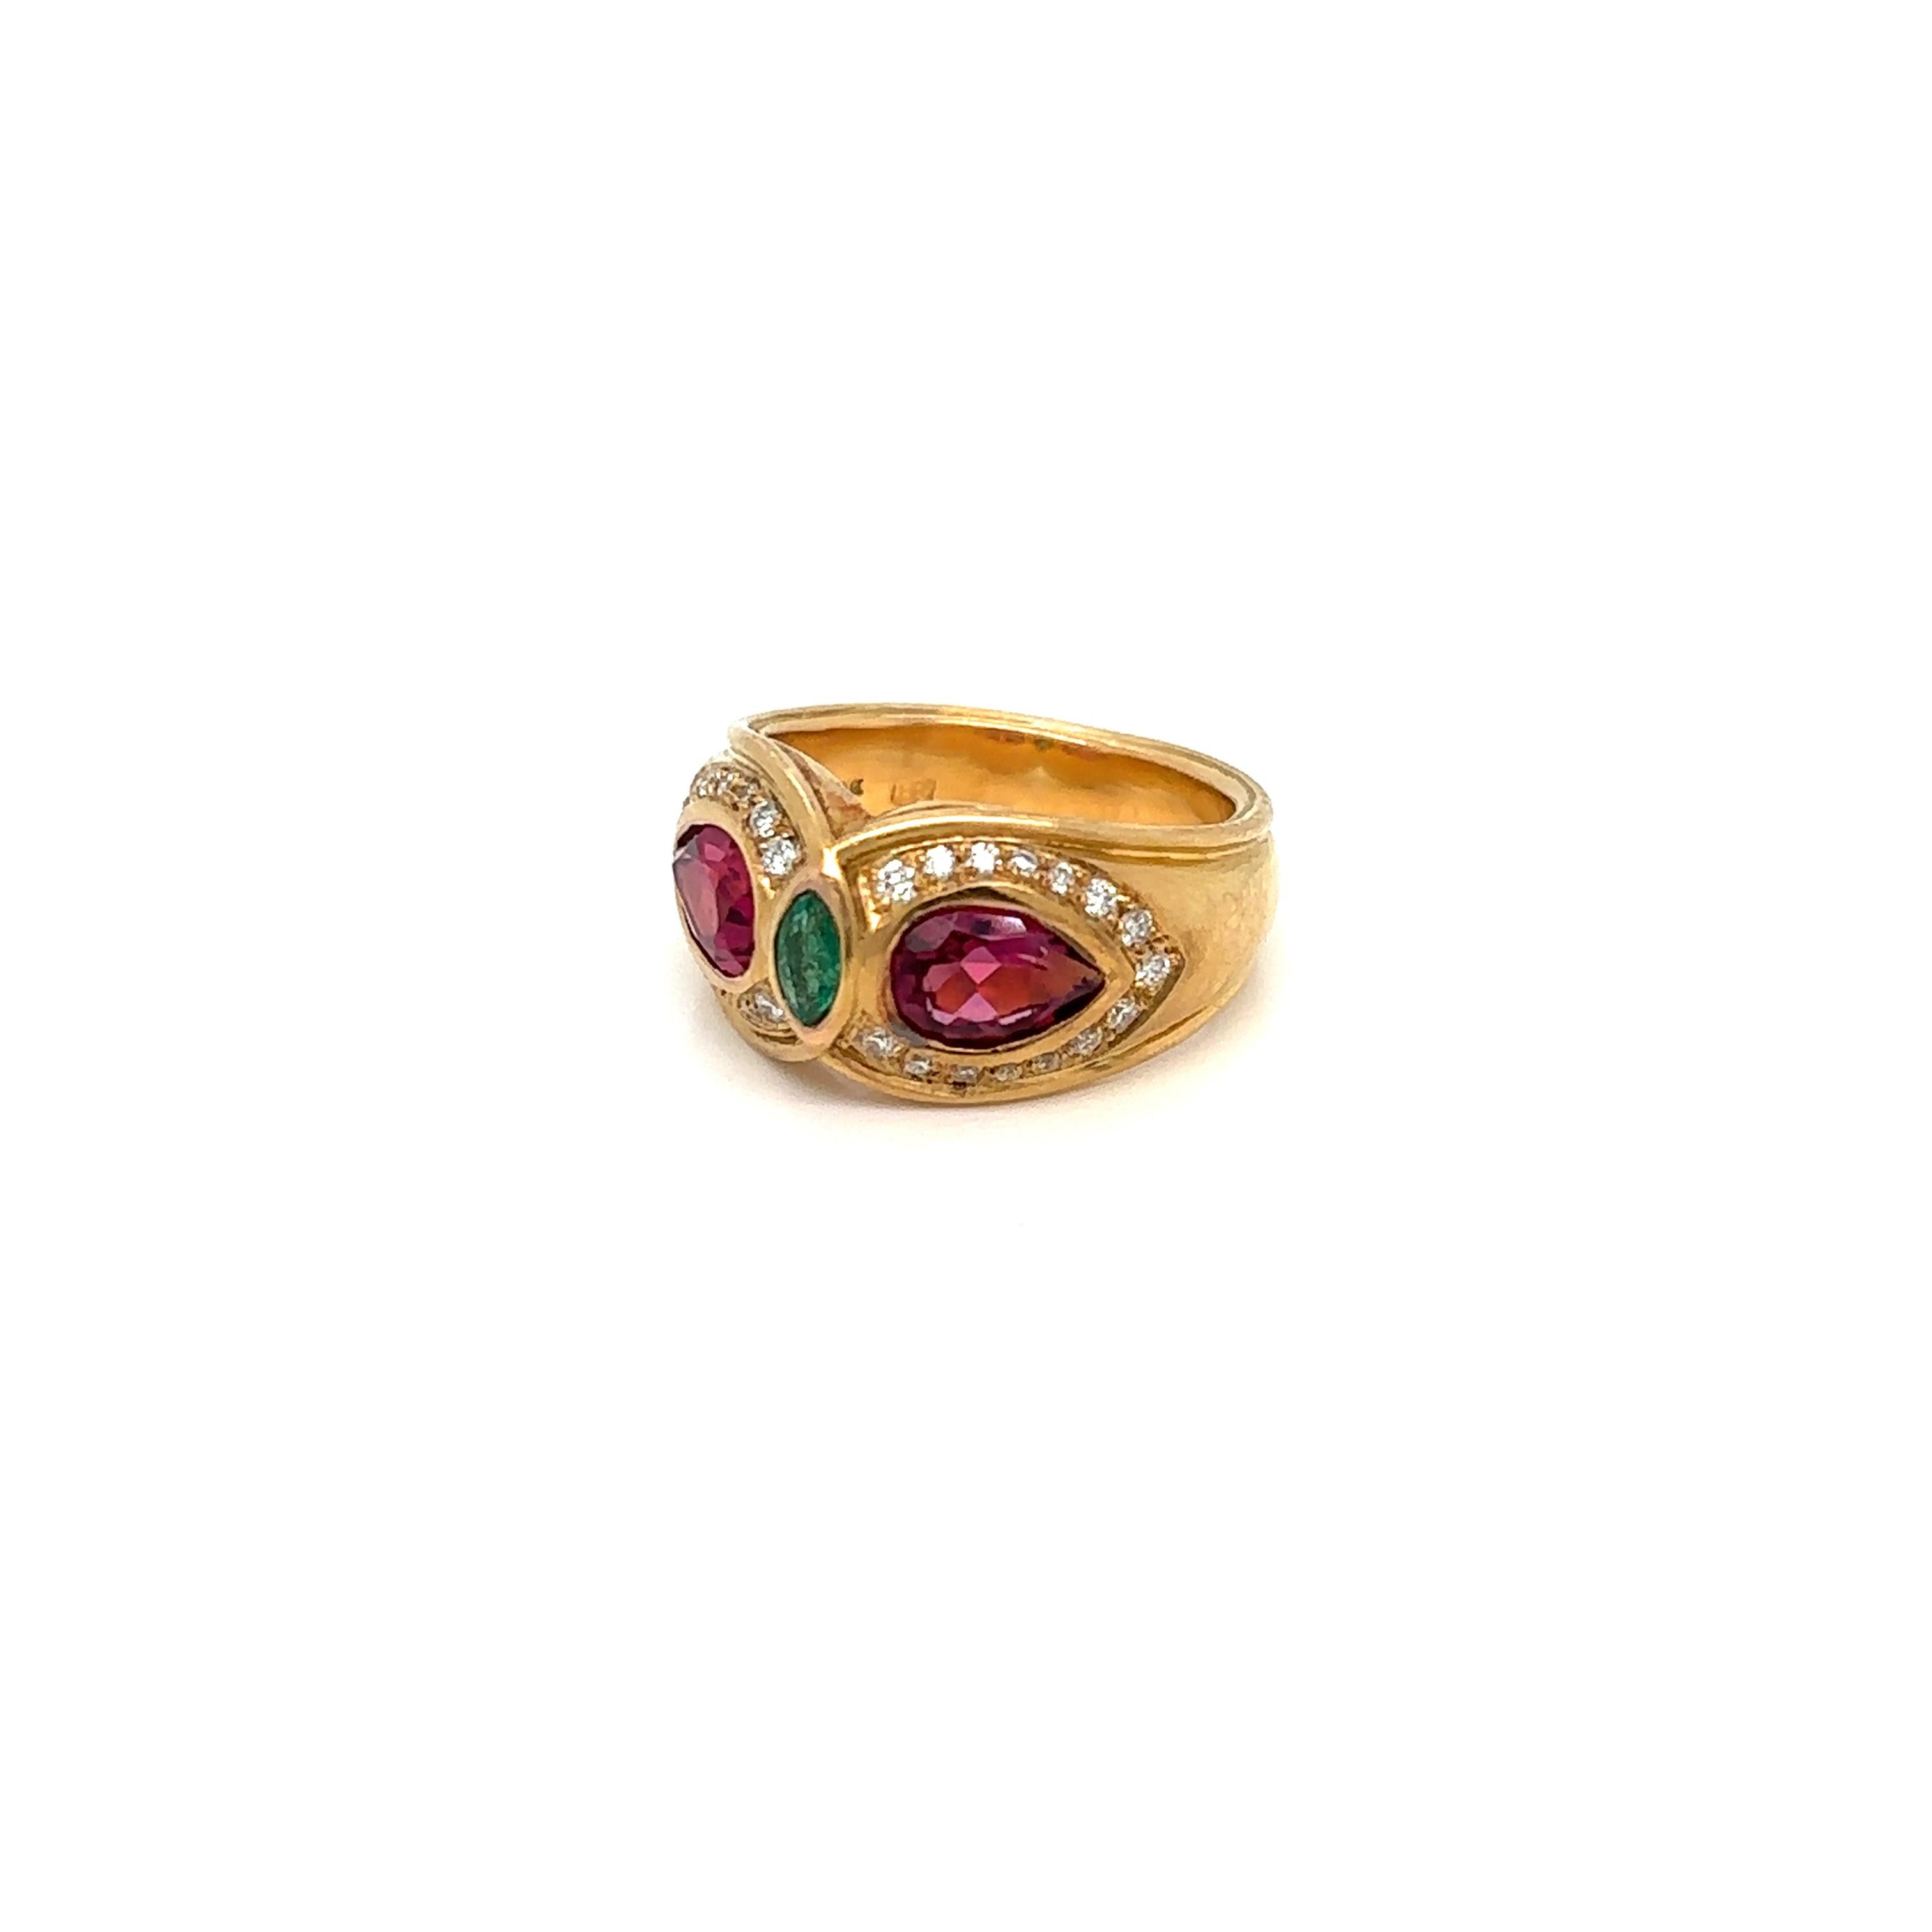 Timeless ring created by Bulgari in France in 1970 circa. The set is made of 18 karat yellow Gold, two sparkling Tourmalines drop, one fine Emerald marquise shape in the center and colorless diamonds.
Stamped BVLGARI, with the maker's mark, the